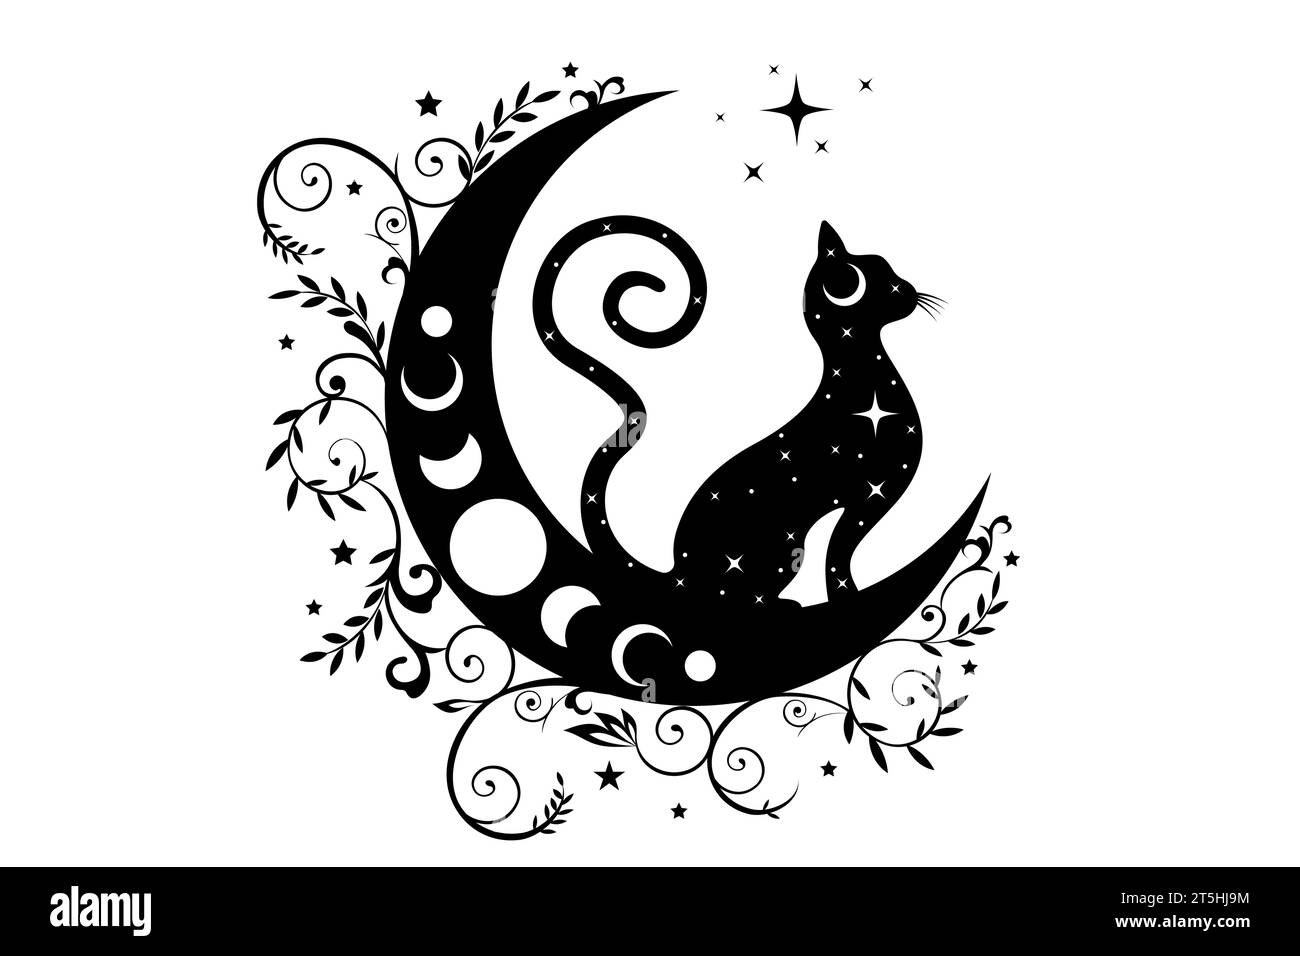 Mystical black cat over celestial crescent moon and moon phases, witchcraft symbol, witchy esoteric logo tattoo. Vector esoteric wiccan clipart boho Stock Vector